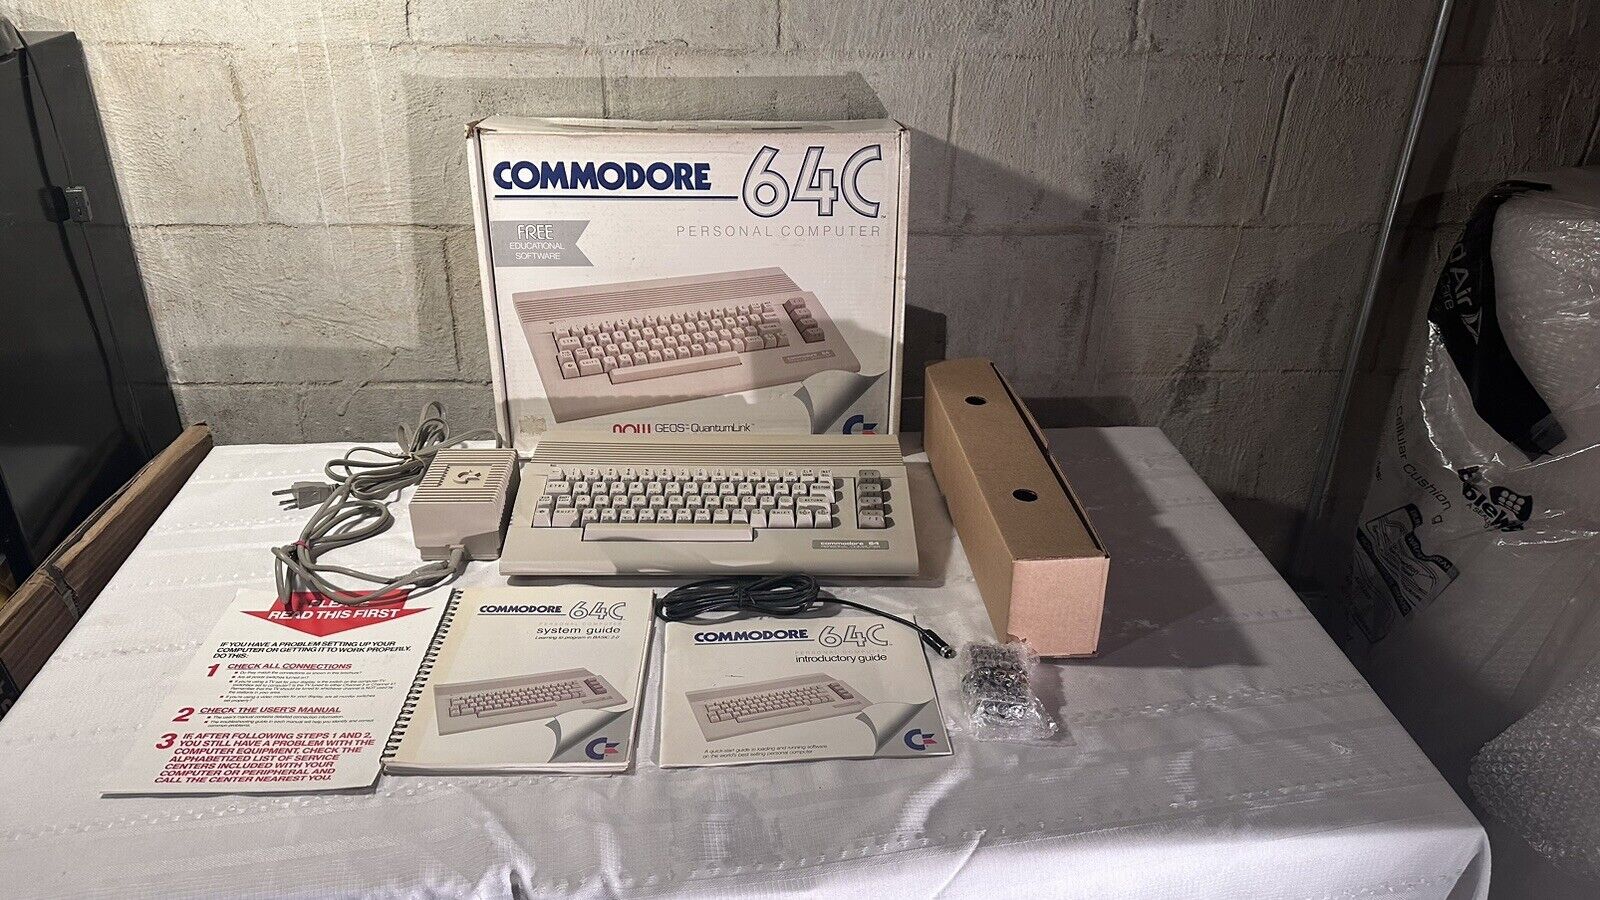 BOXED Retro Restored Commodore 64c Computer System Tested 1980s C64c Complete